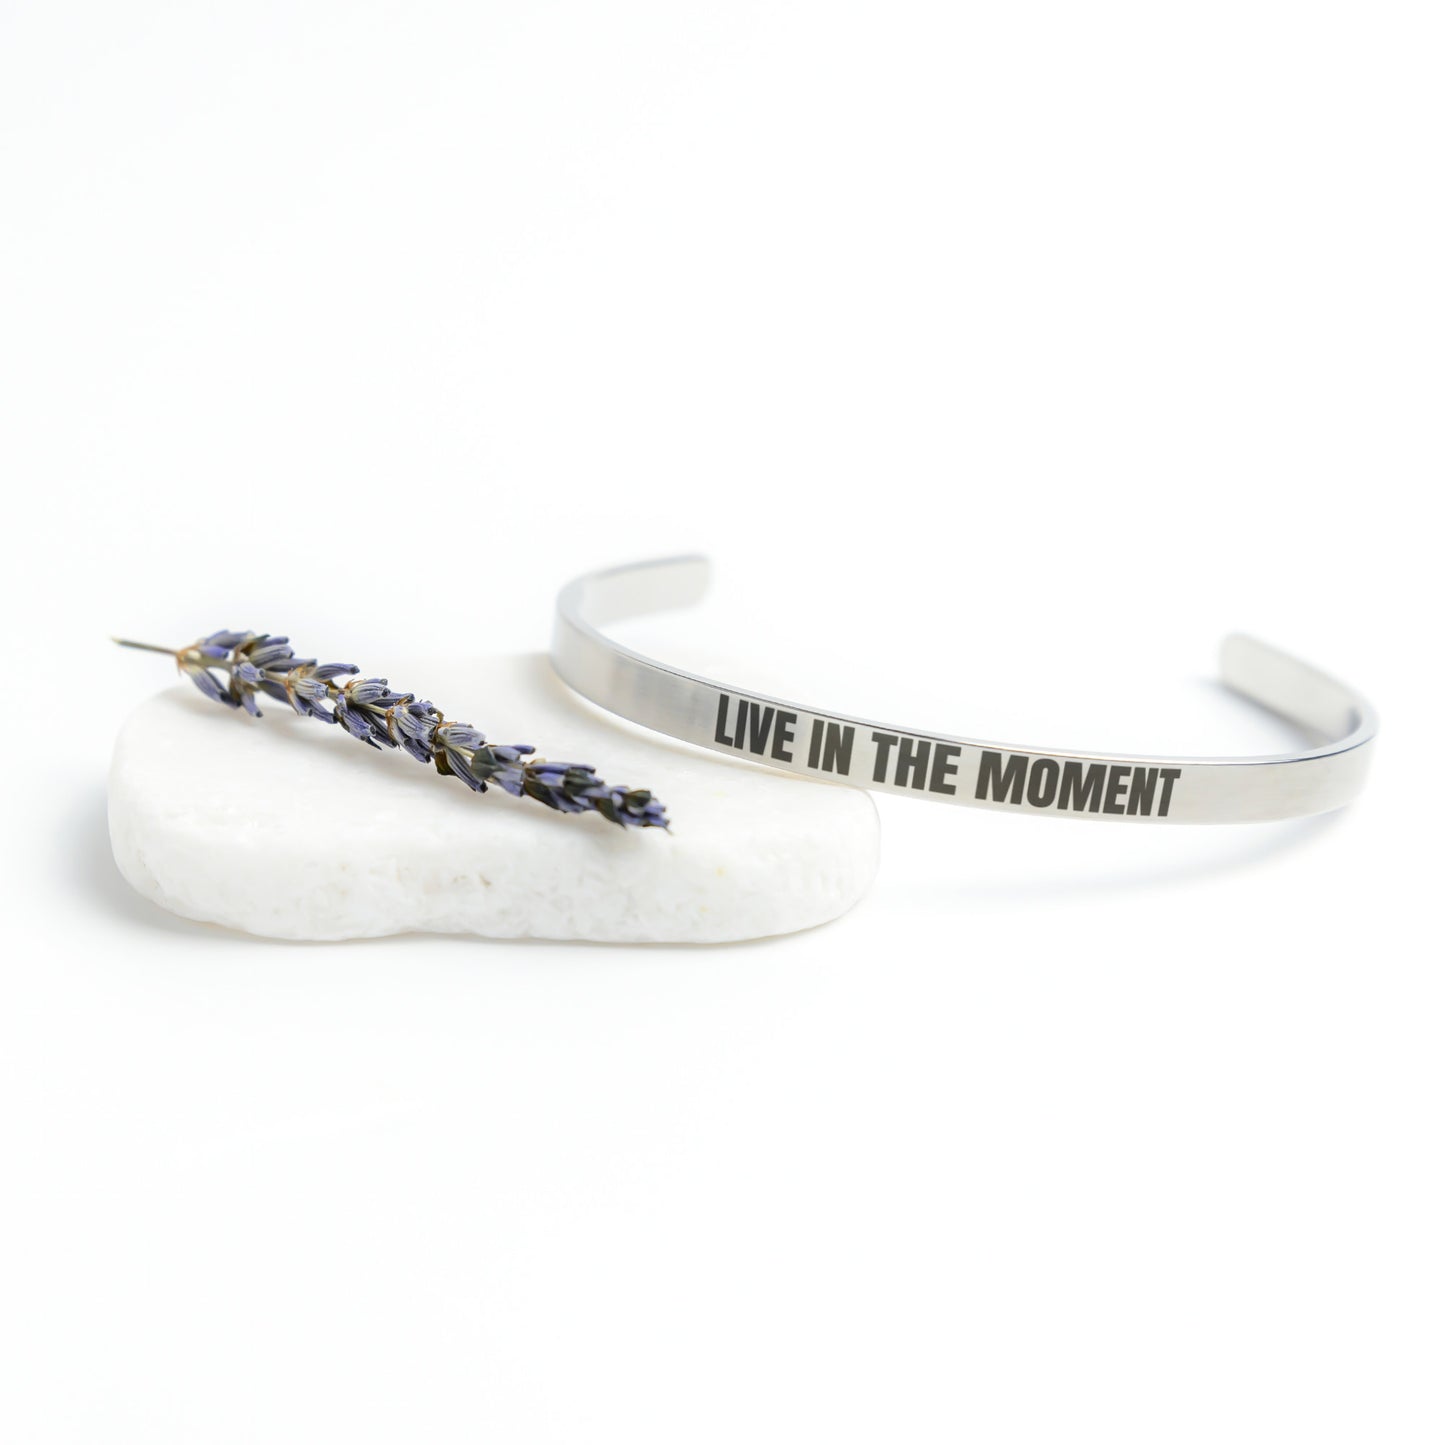 LIVE IN THE MOMENT| CUFF BRACELET